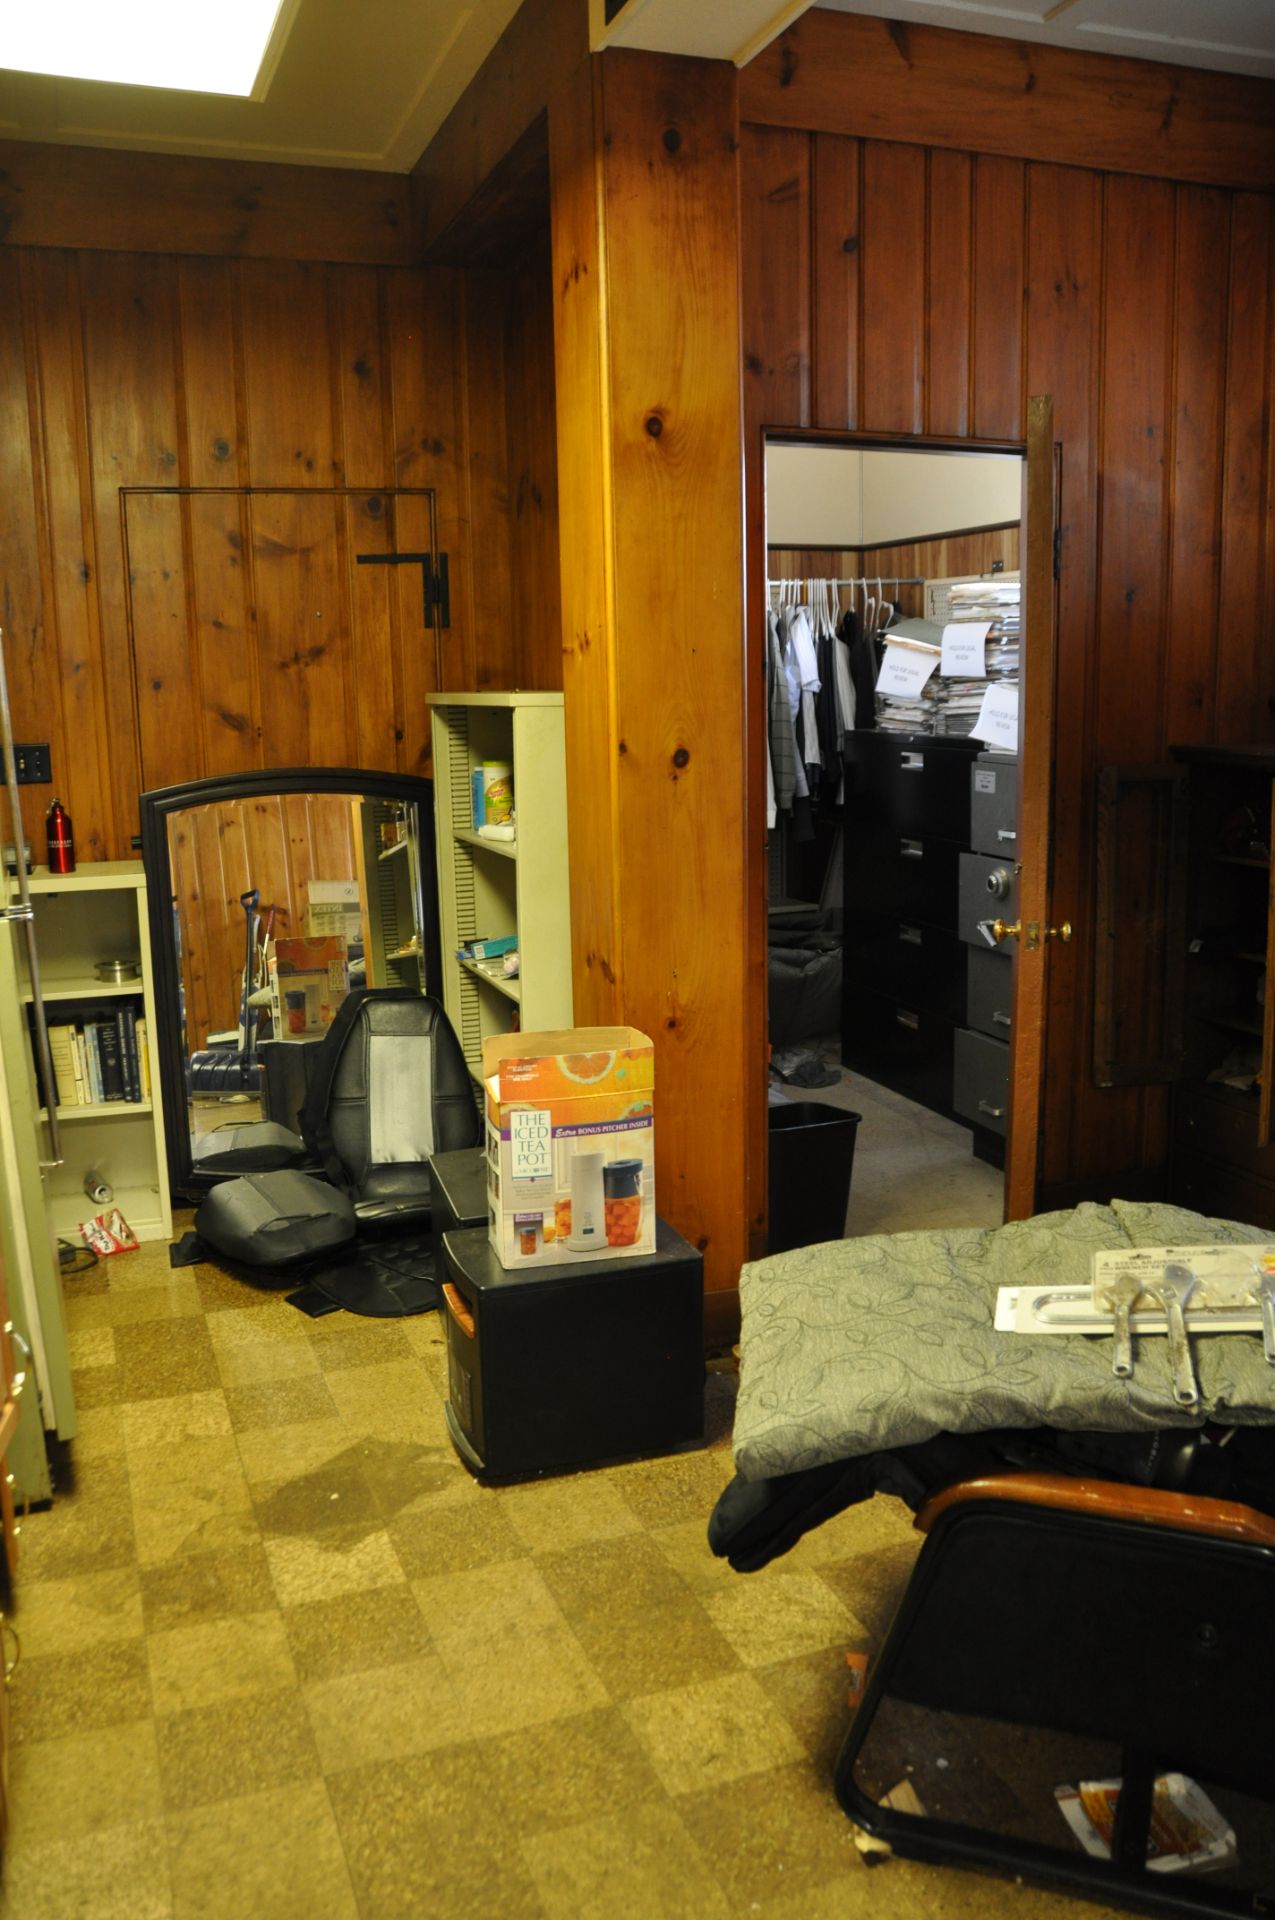 OFFICE CONTENTS: L DESK, RECLINER, REFRIGERATOR, COOKING UTENSILES… - Image 5 of 8